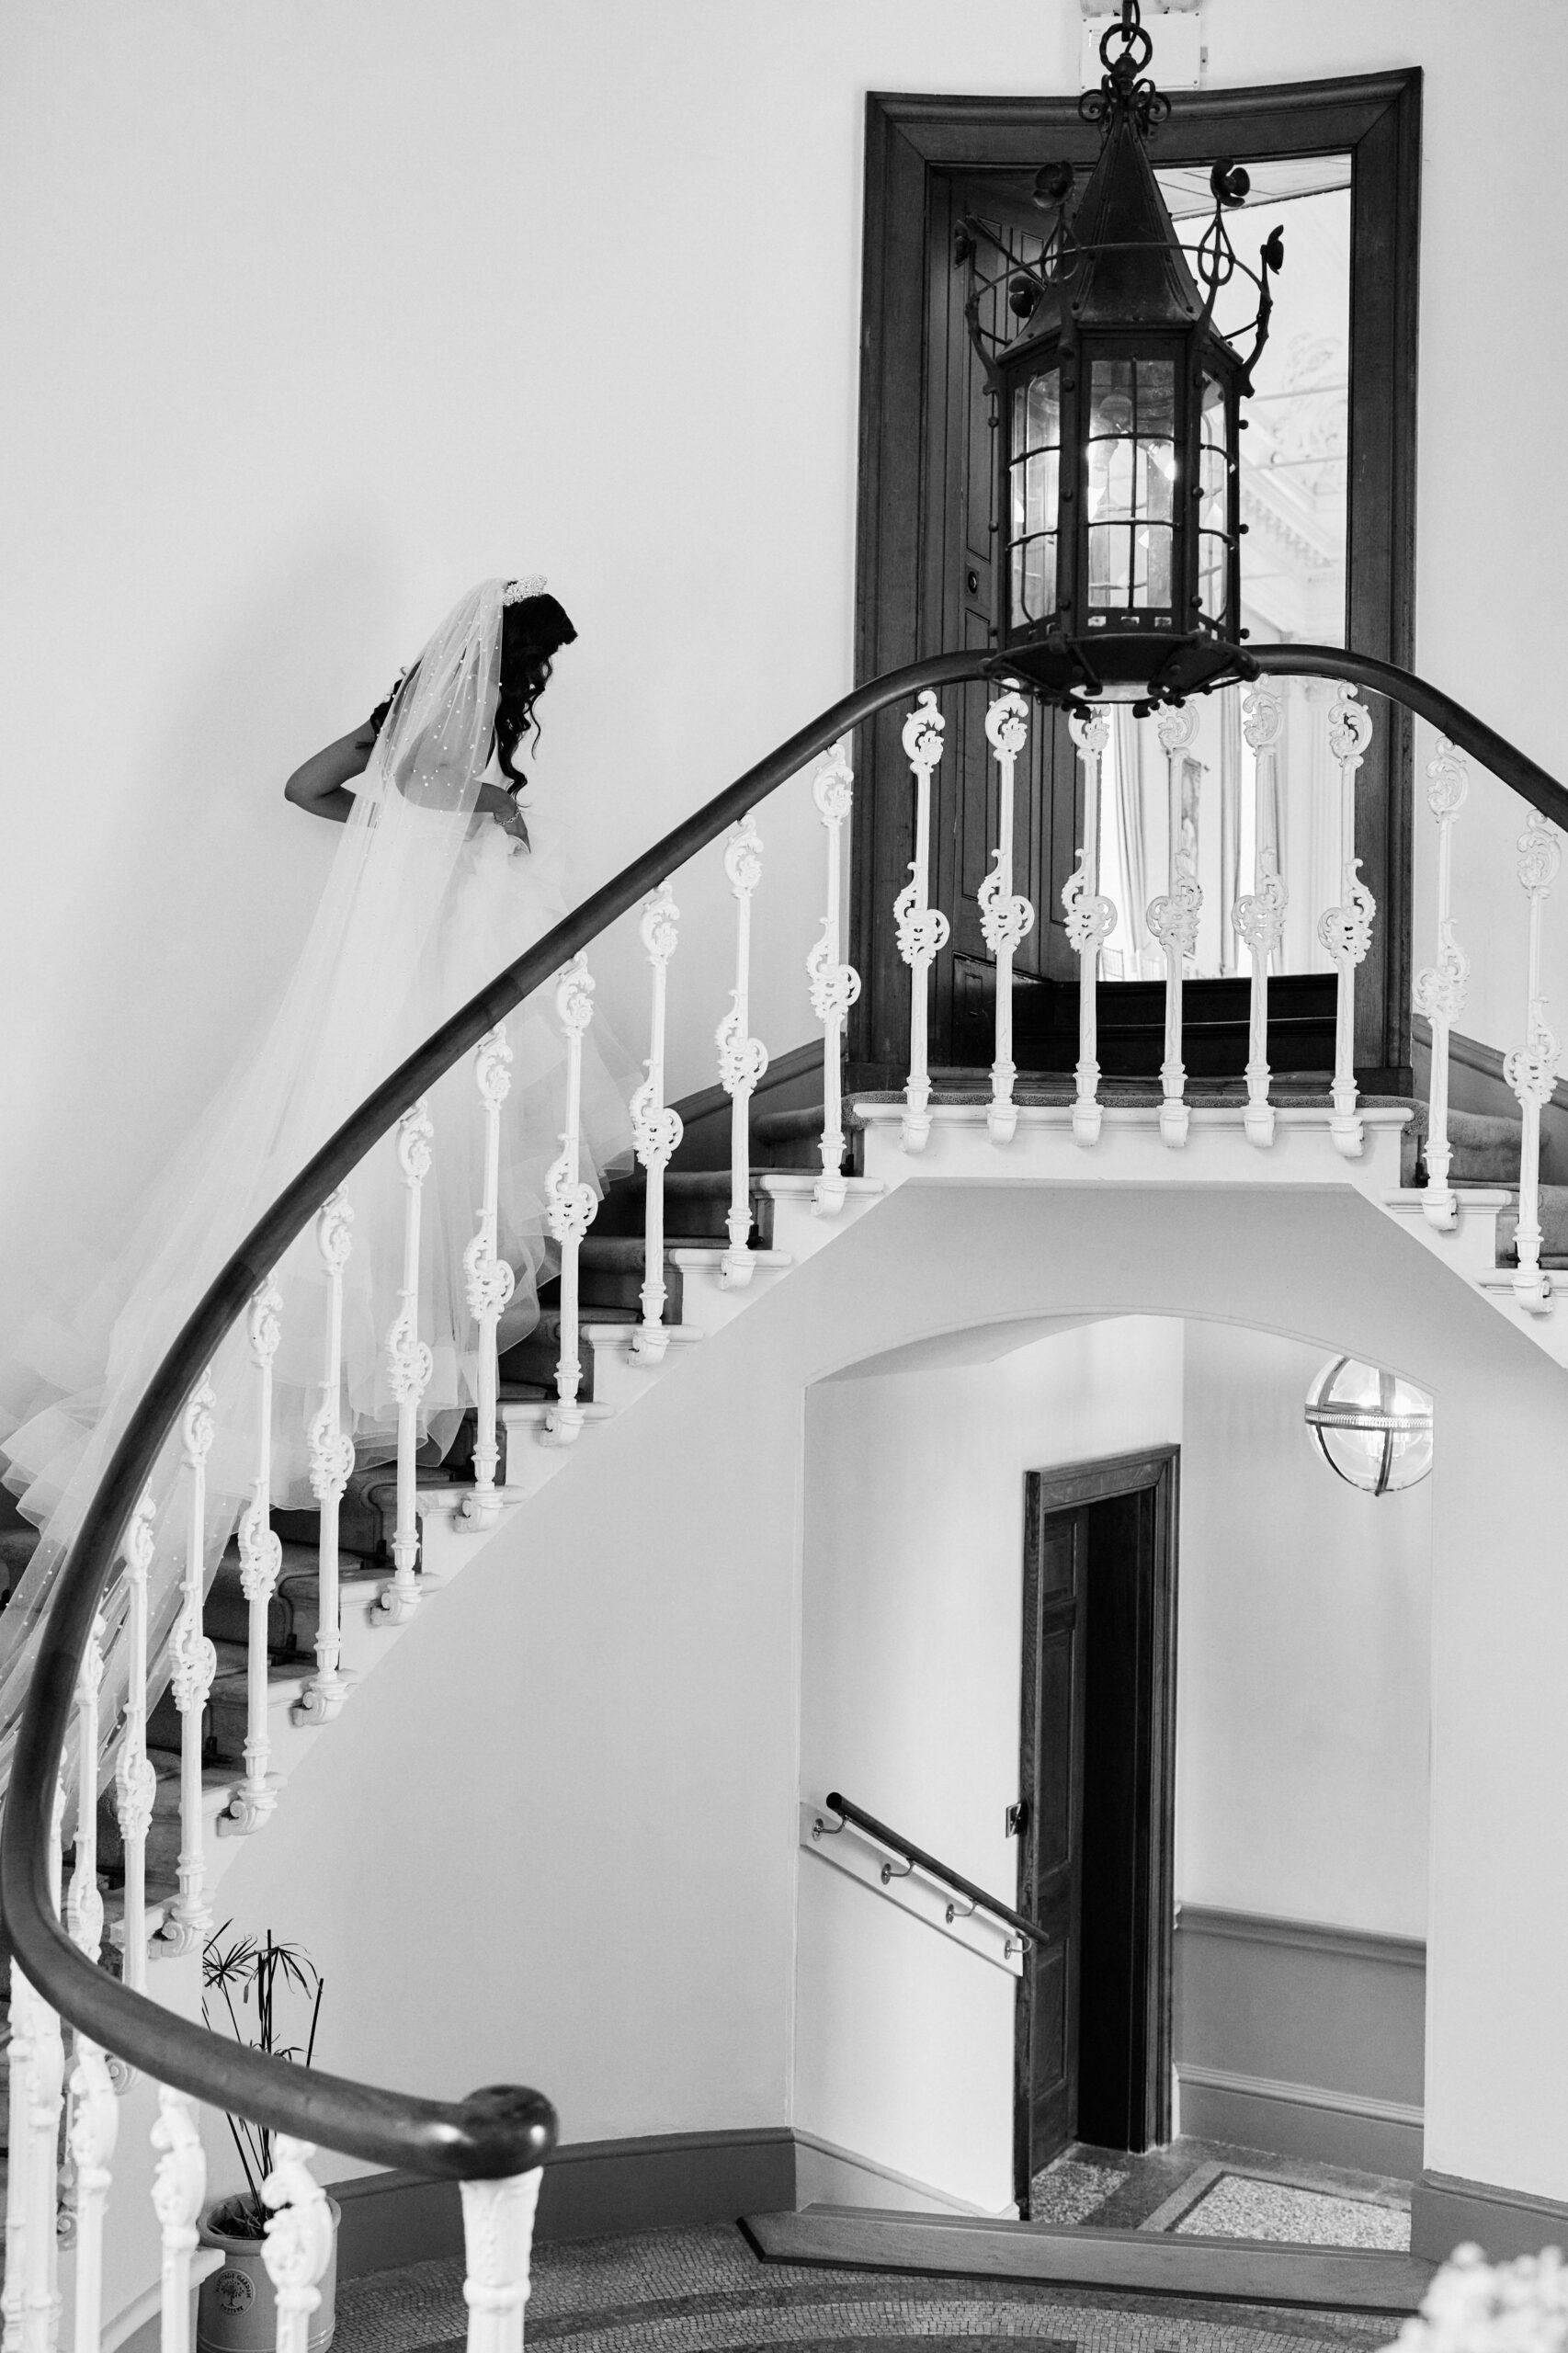 A black and white picture shows a bride going down the stairs.